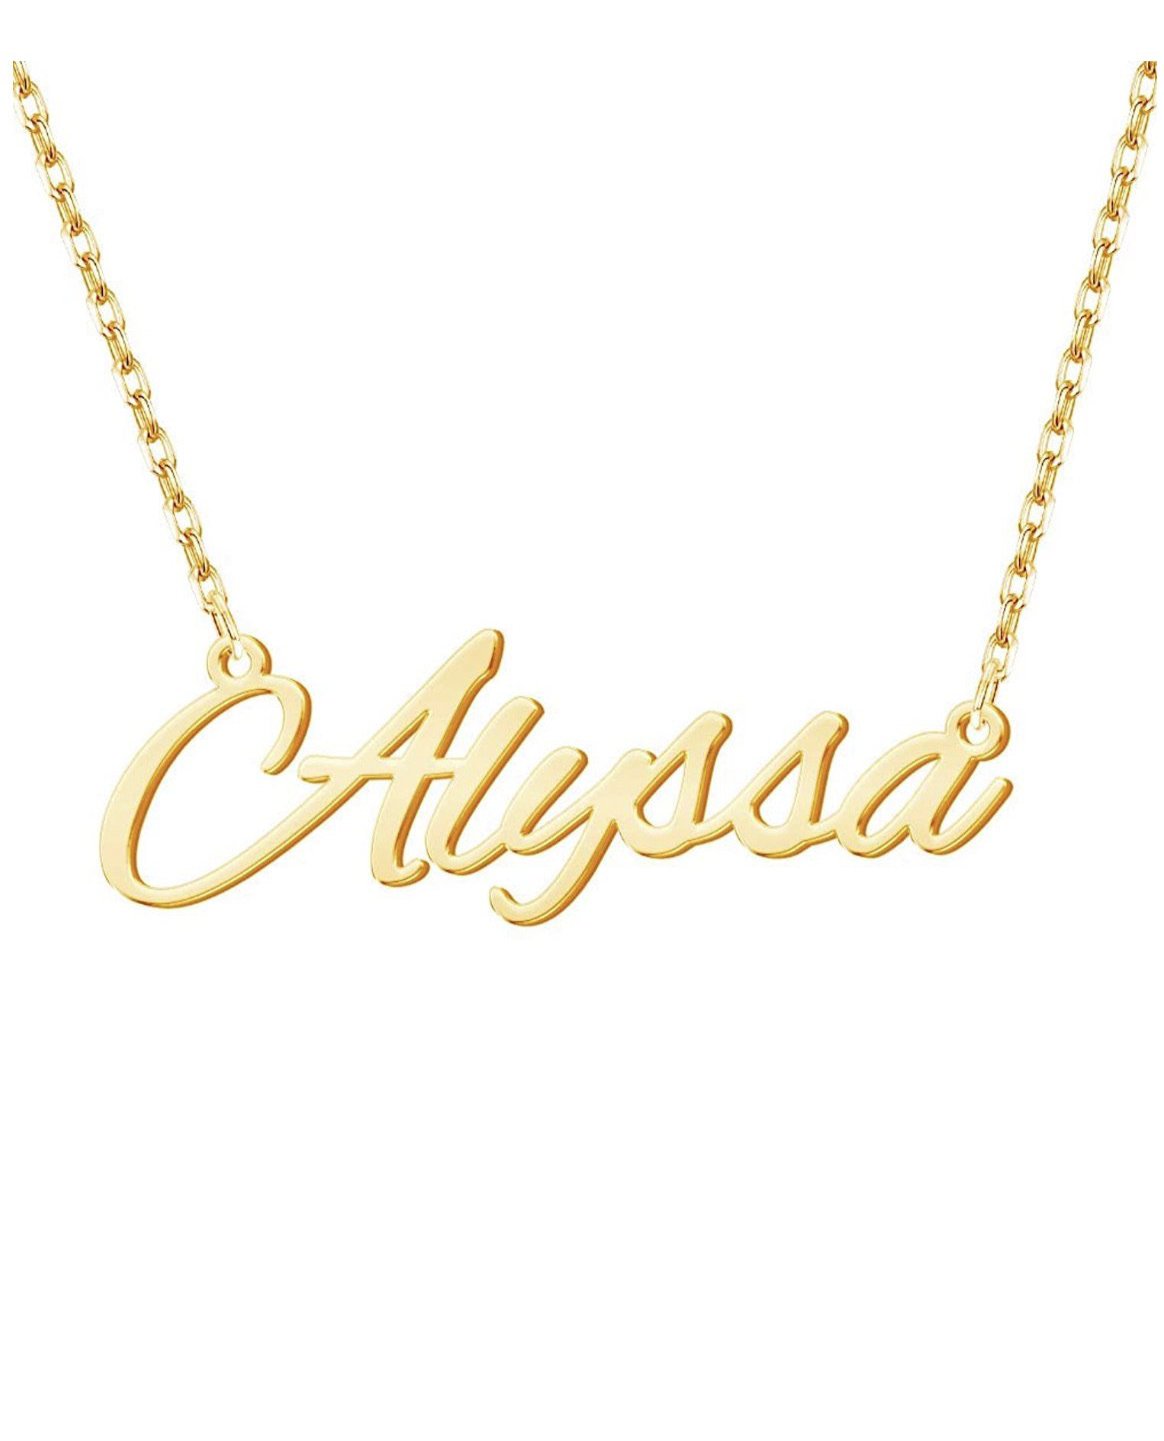 CLASSIC PERSONALIZED NAME NECKLACE